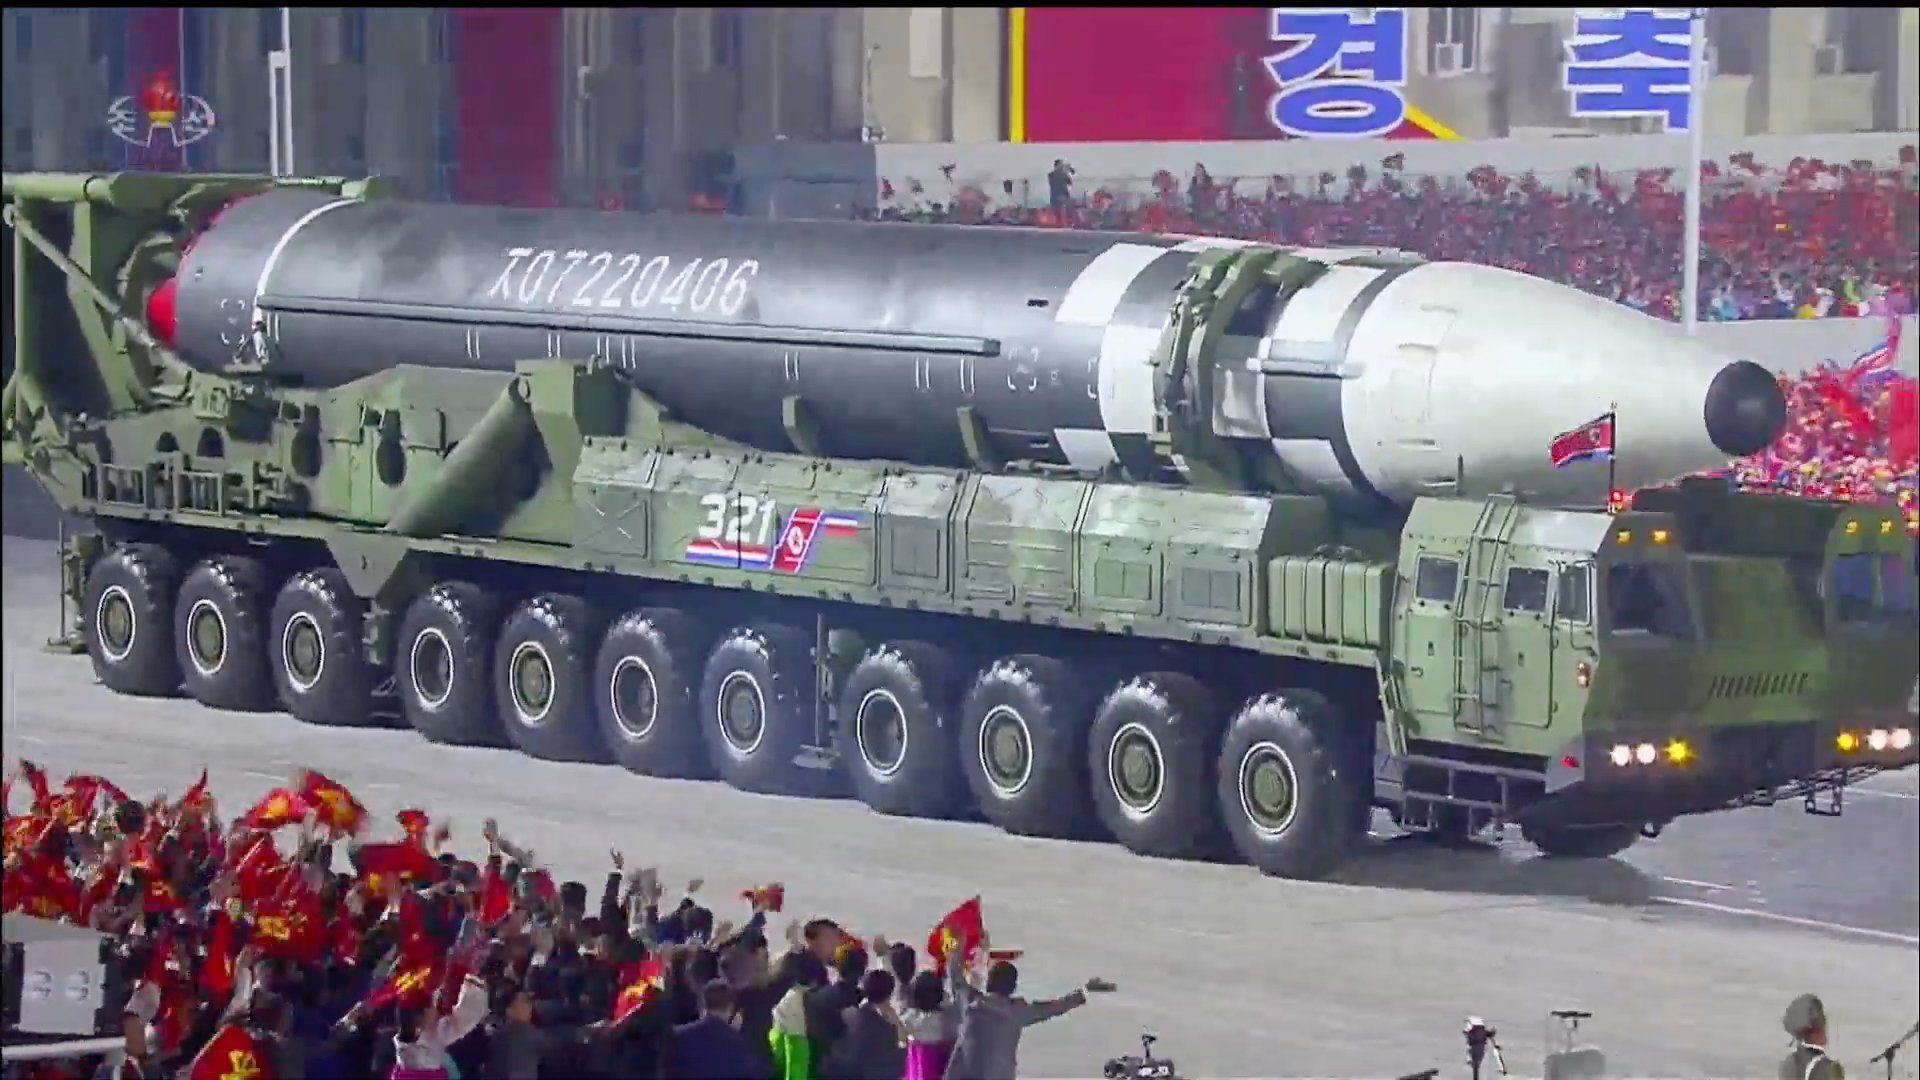 Screengrab of North Korean television showing massive new, never-before-seen ICBM in Pyongyang at celebrations marking the 75th anniversary of the founding of the Democratic People's Republic of Korea, Saturday, October 10, 2020. - Sputnik International, 1920, 09.09.2022